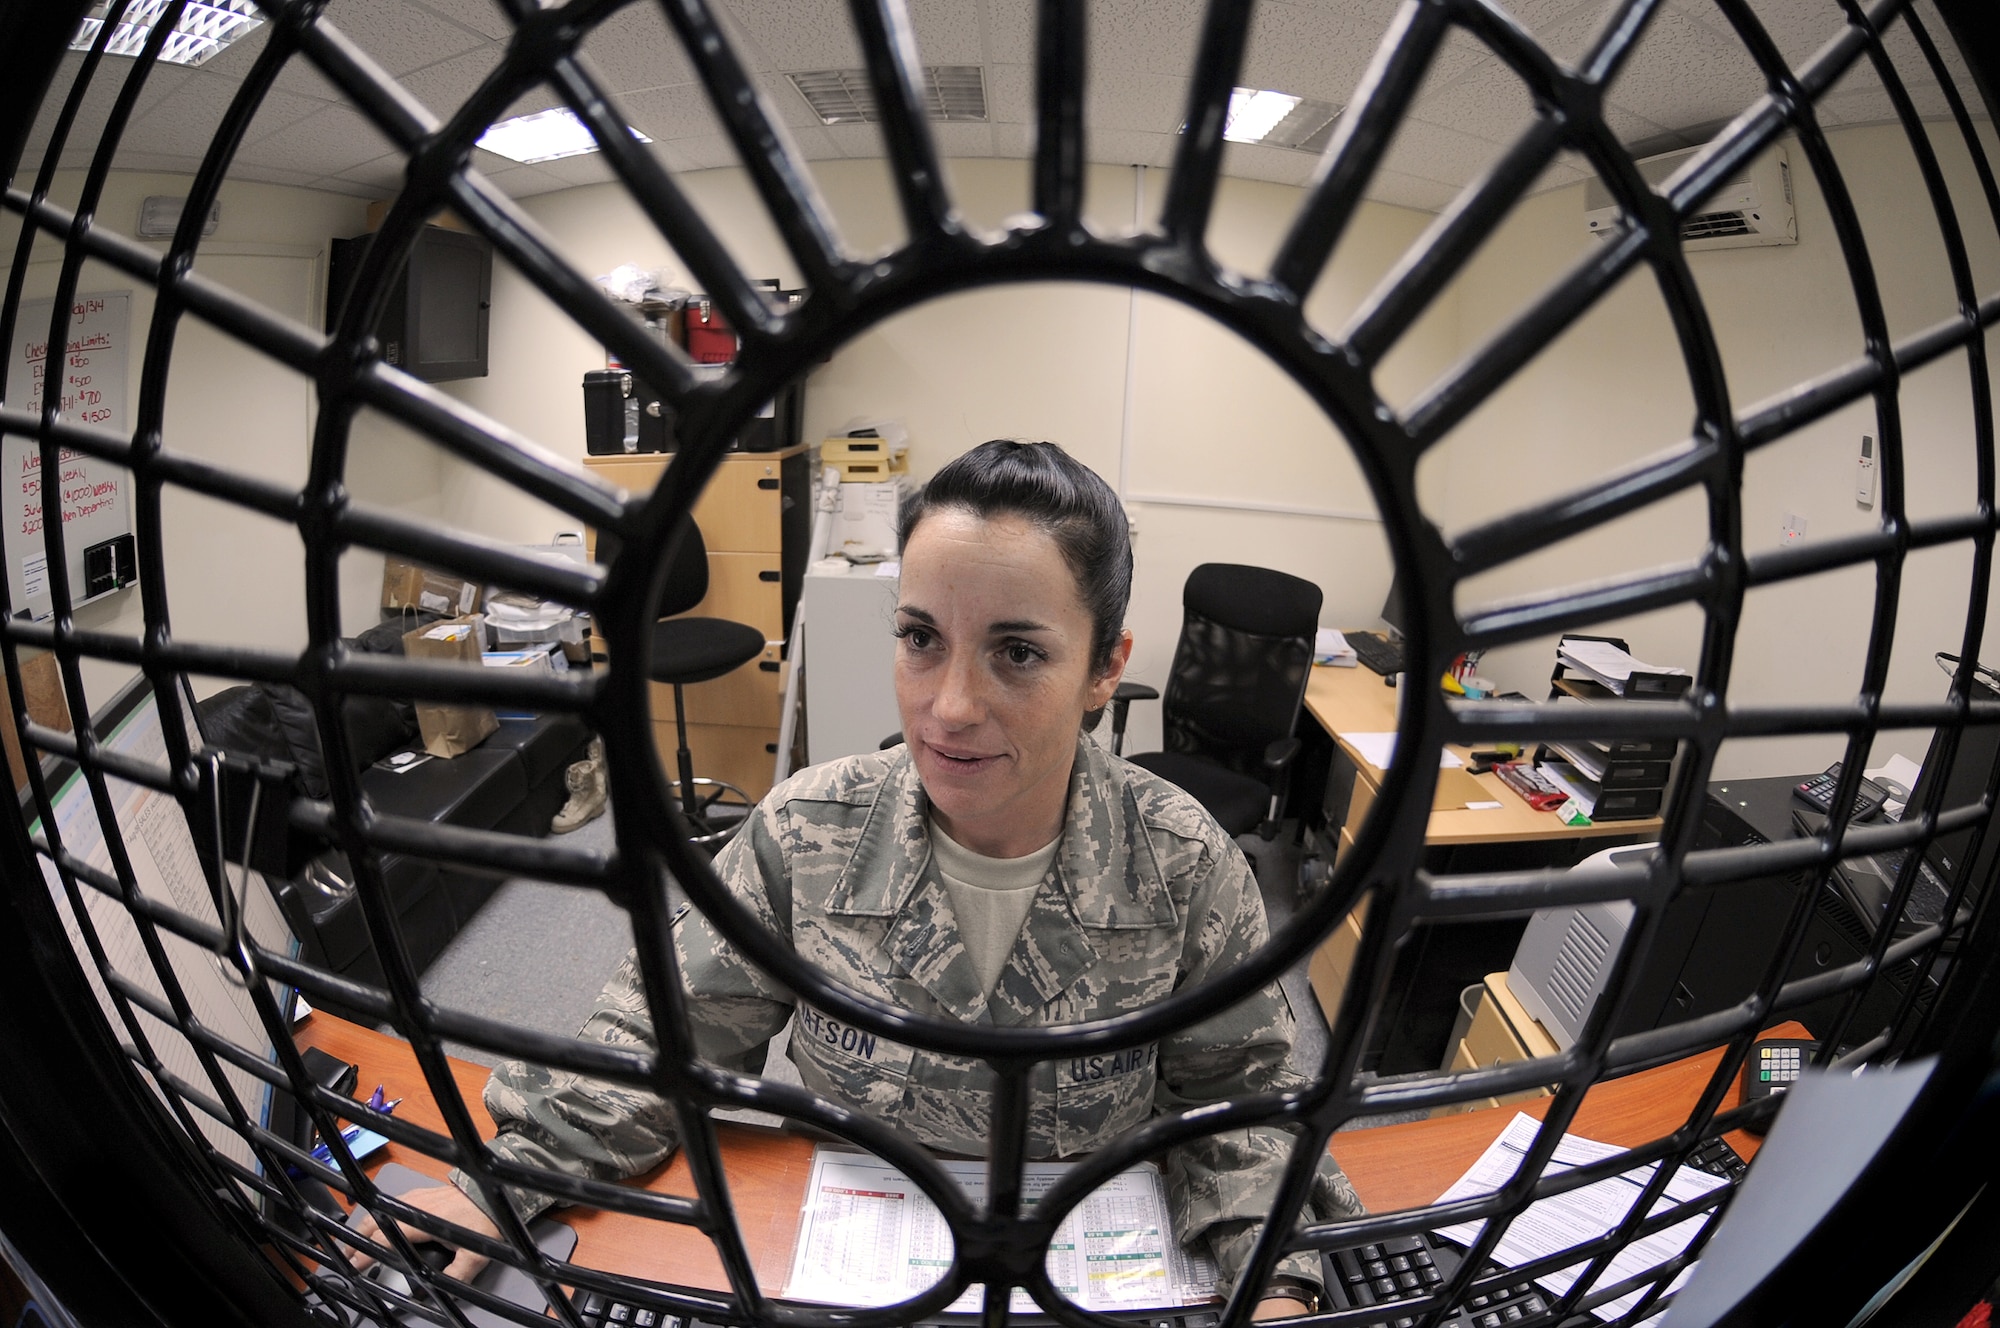 SOUTHWEST ASIA -Staff Sgt. Keri Watson, 380th Air Expeditionary Wing Finance Office, provides customers with financial assistance Aug. 17. Sergeant Watson is deployed from the 162nd Fighter Wing, and hails from Tucson, Ariz. (U.S. Air Force photo/Tech. Sgt. Charles Larkin Sr)